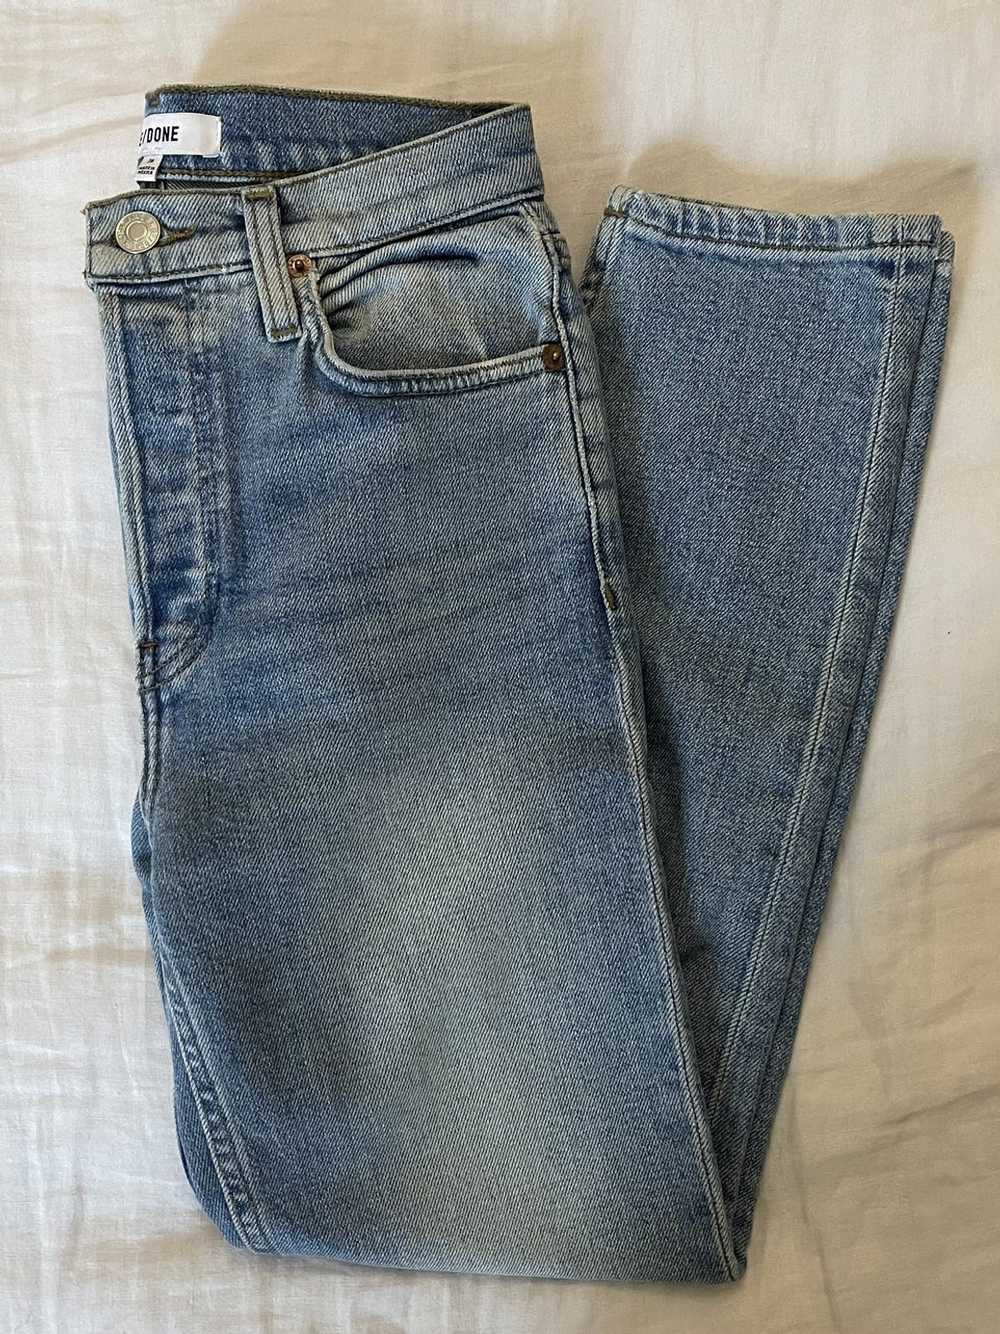 RE/DONE RE/DONE Jeans - Light Wash - image 2